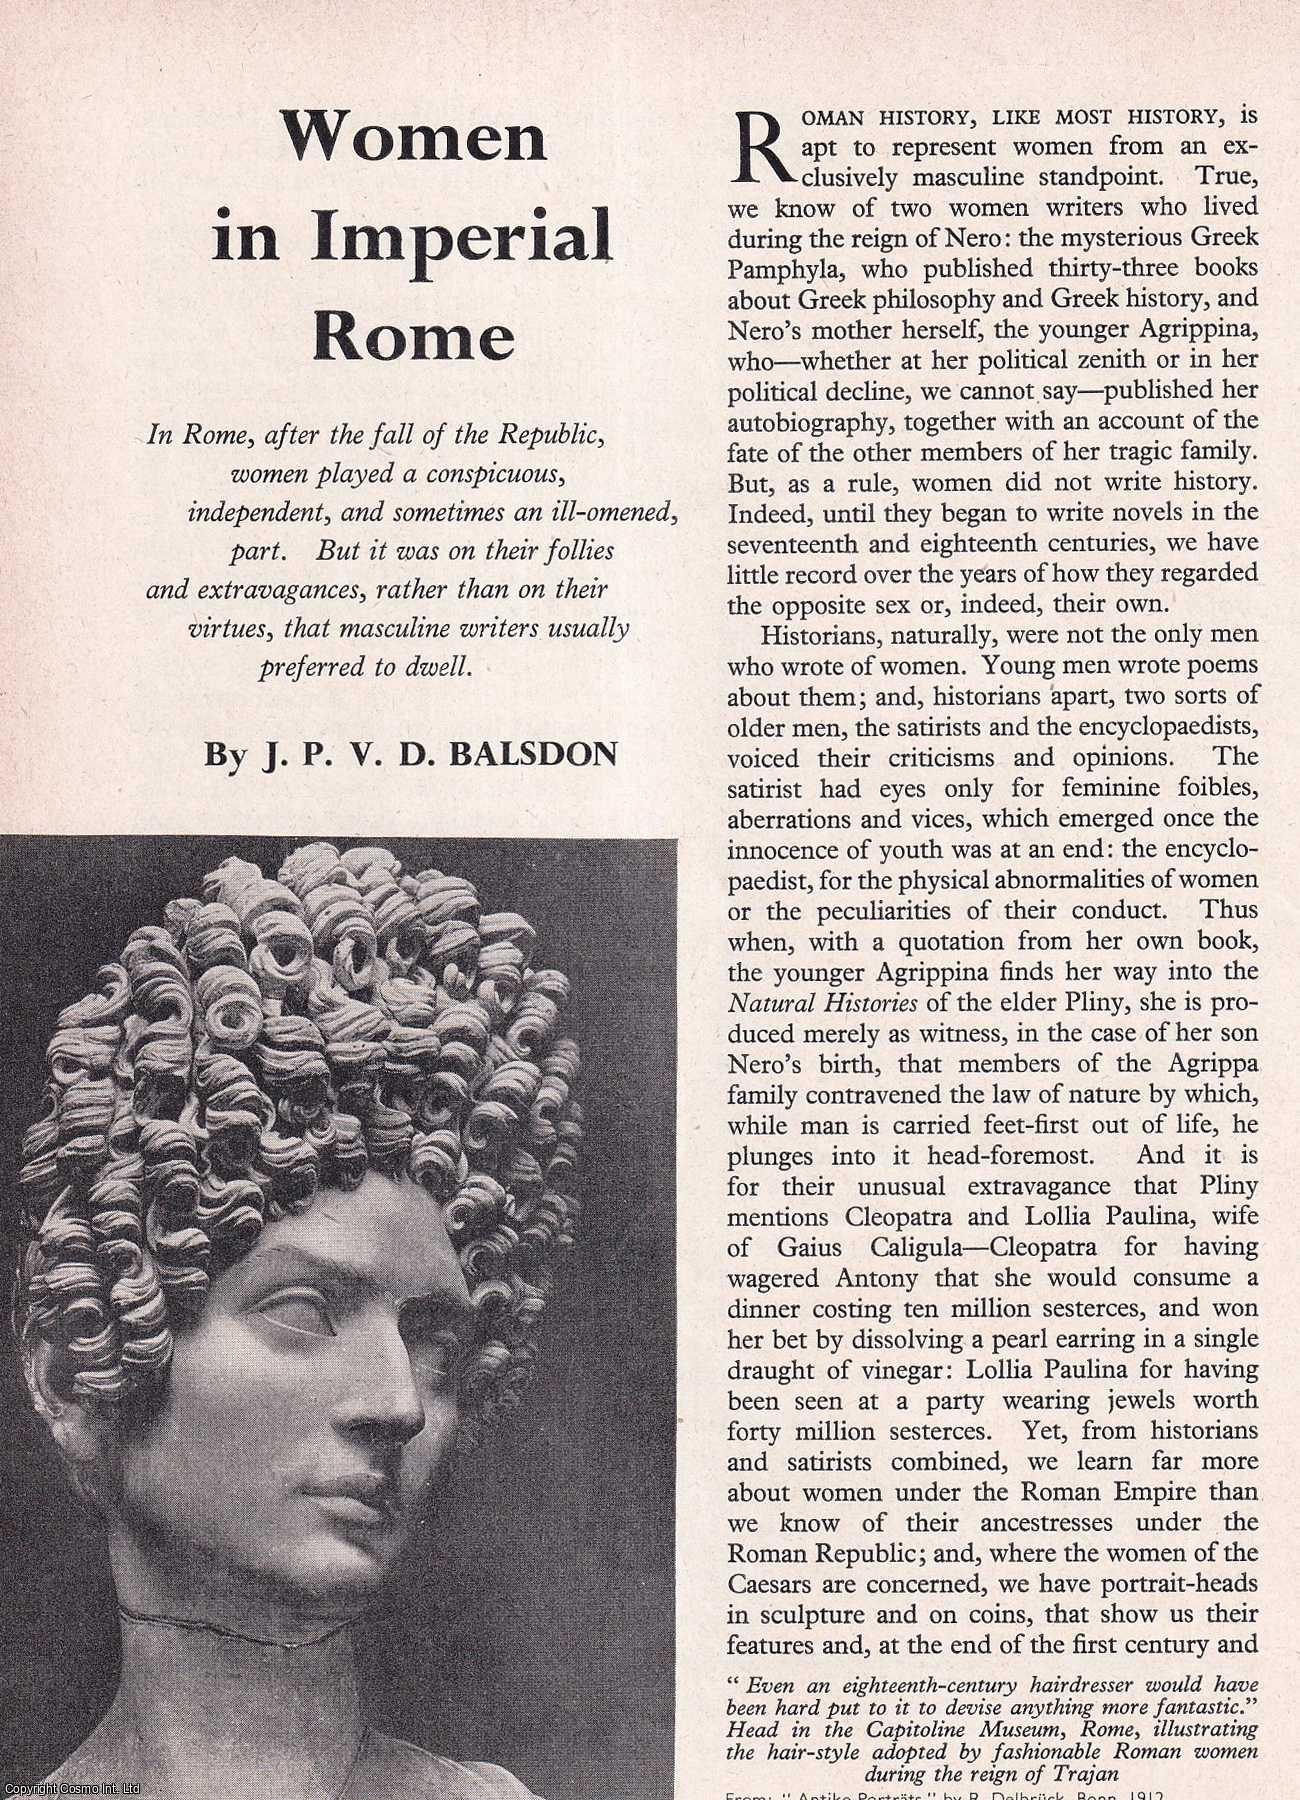 J.P.V.D. Balsdon - Women in Imperial Rome. An original article from History Today magazine, 1960.